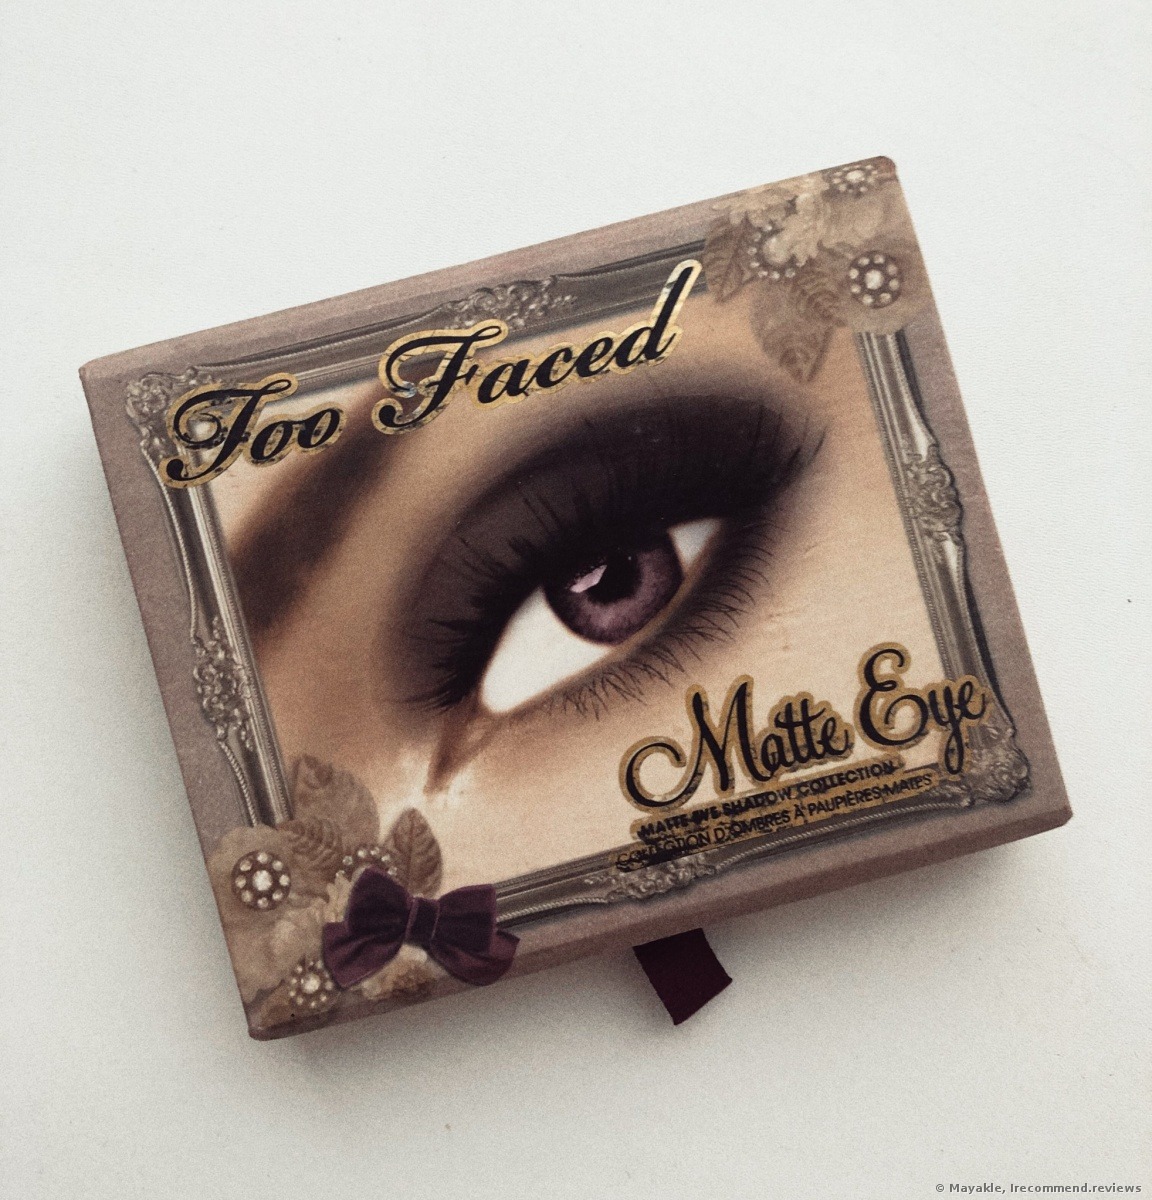 Too Faced Glitter Bomb Eye Shadow Collection: 1 Palette, 5 Ways